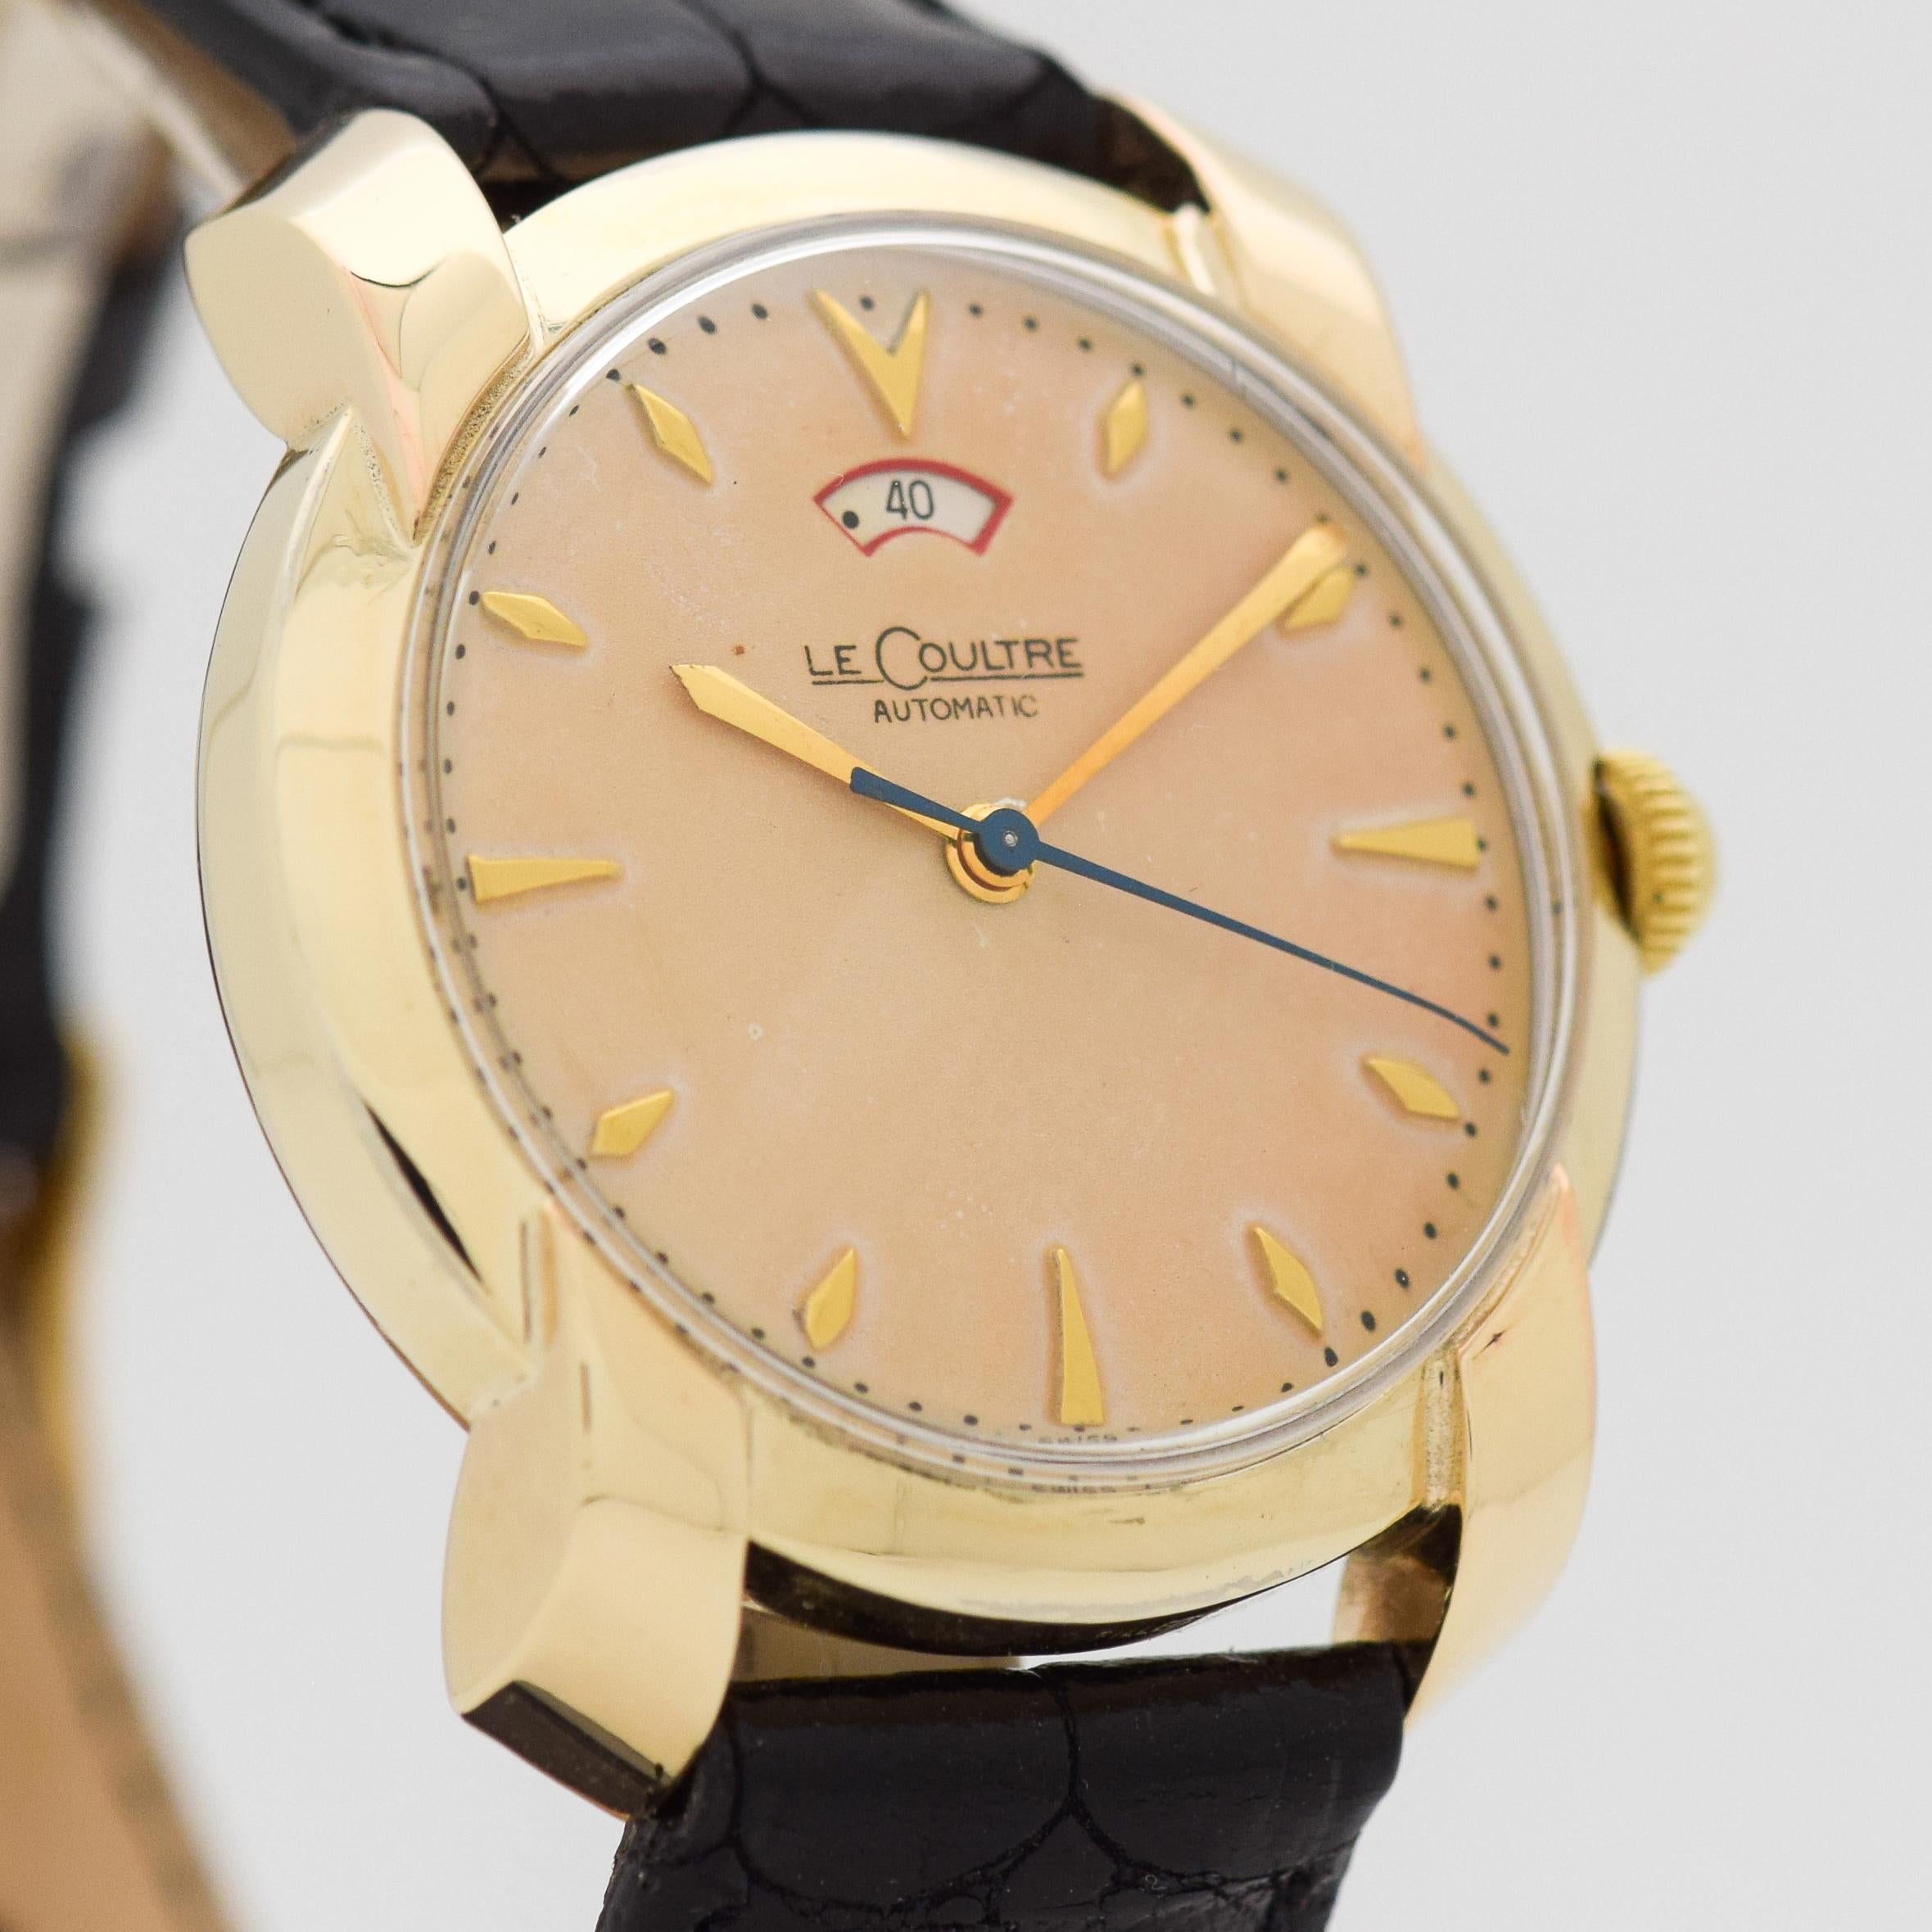 1950's Vintage Jaeger - Le Coultre 40 Hour Power Reserve Bumper Automatic 10k Yellow Gold Filed watch with Original Patina Silver with Applied Gold Color Triangle and Diamond Shape Markers. 34mm x 38mm lug to lug (1.34 in. x 1.5 in.) - 17 jewel,